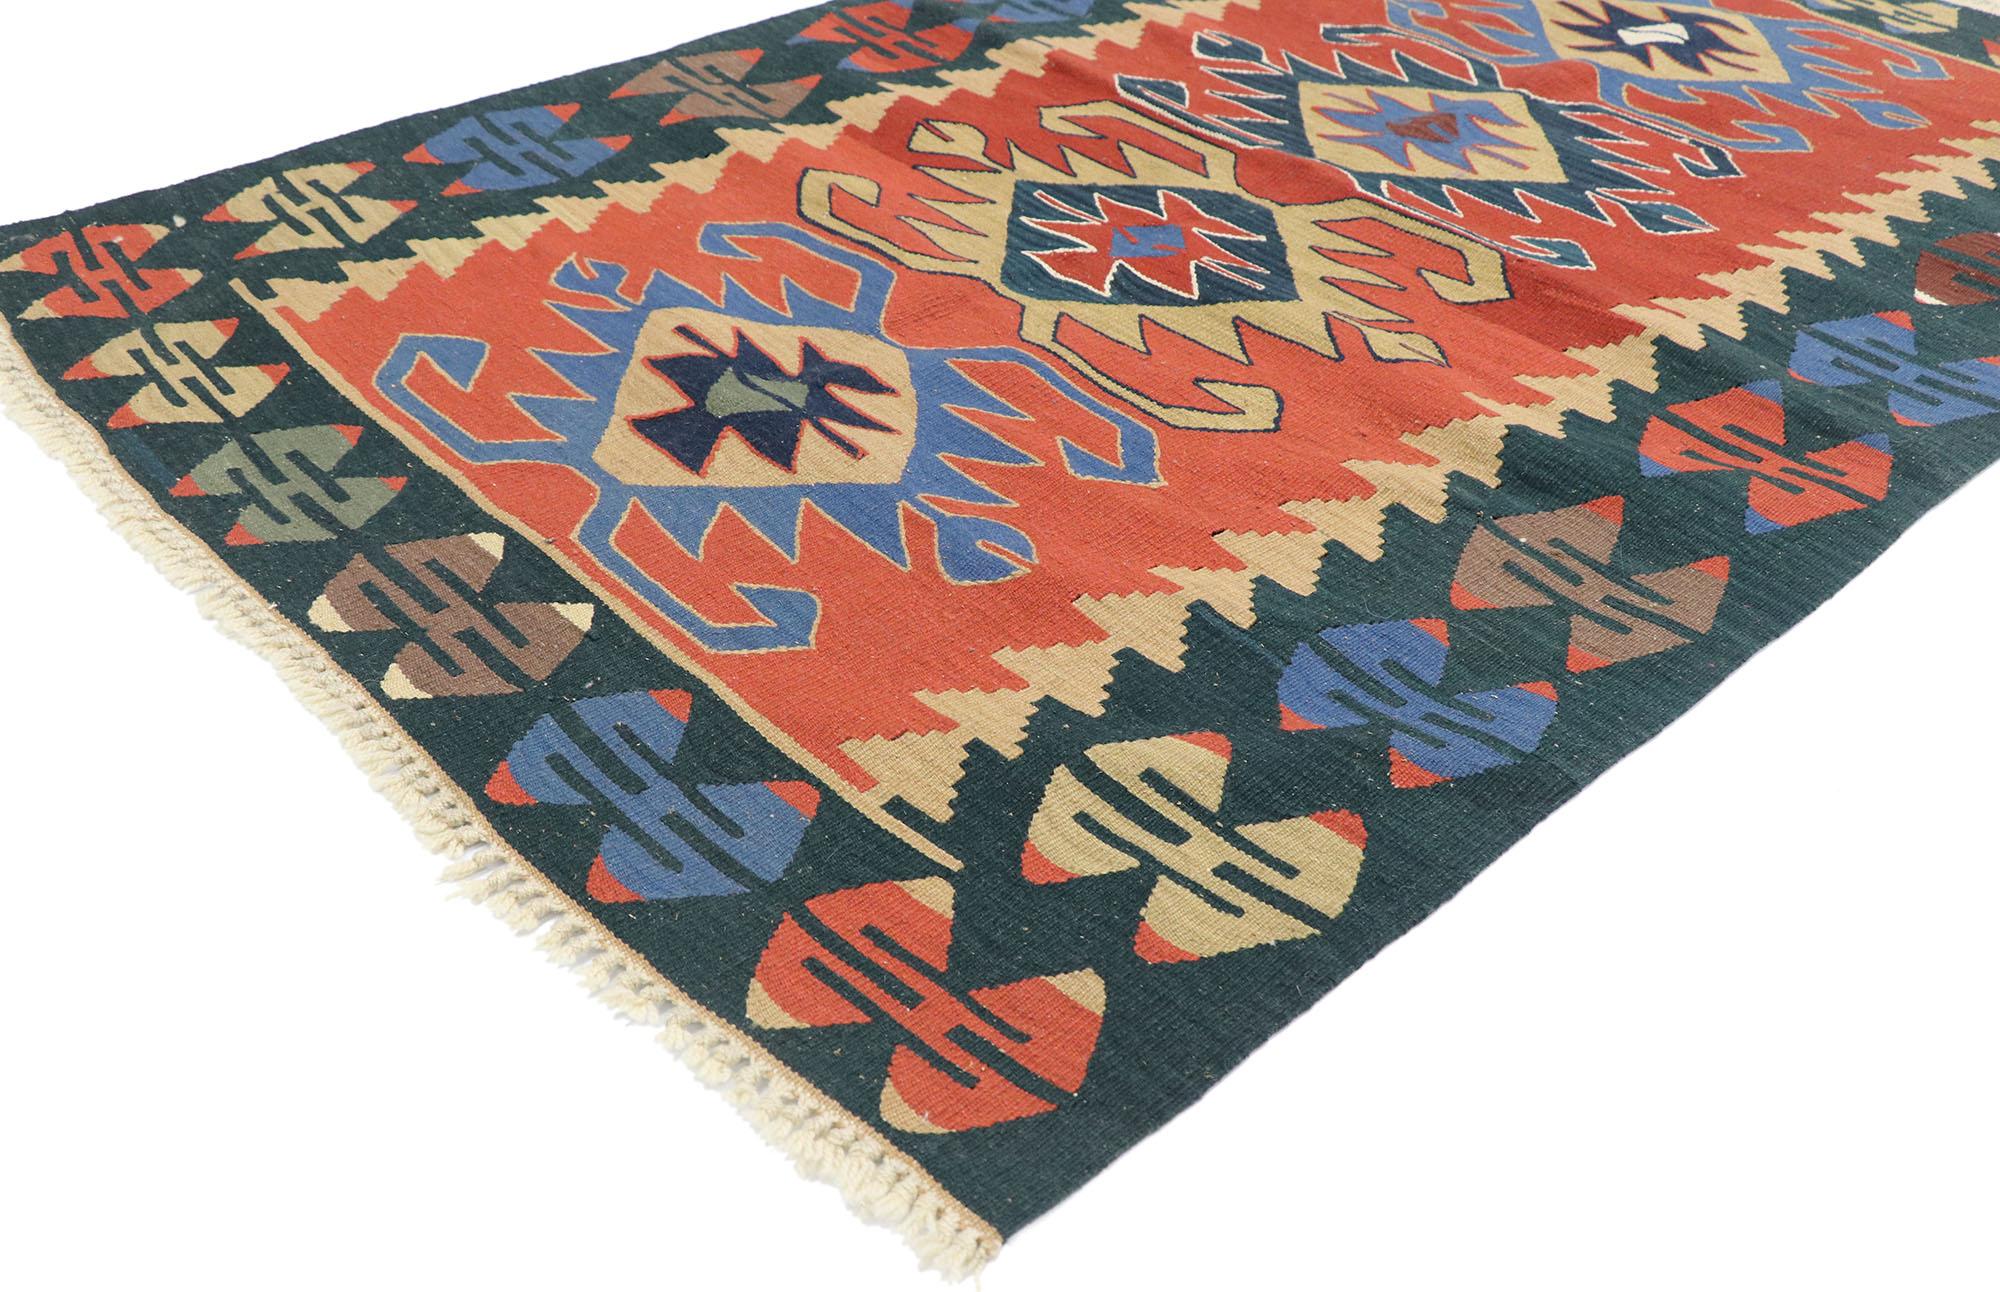 77825 vintage Persian Shiraz Kilim rug with Tribal style 03'10 x 05'09. Full of tiny details and a bold expressive design combined with vibrant colors and tribal style, this hand-woven wool vintage Persian Shiraz kilim rug is a captivating vision of